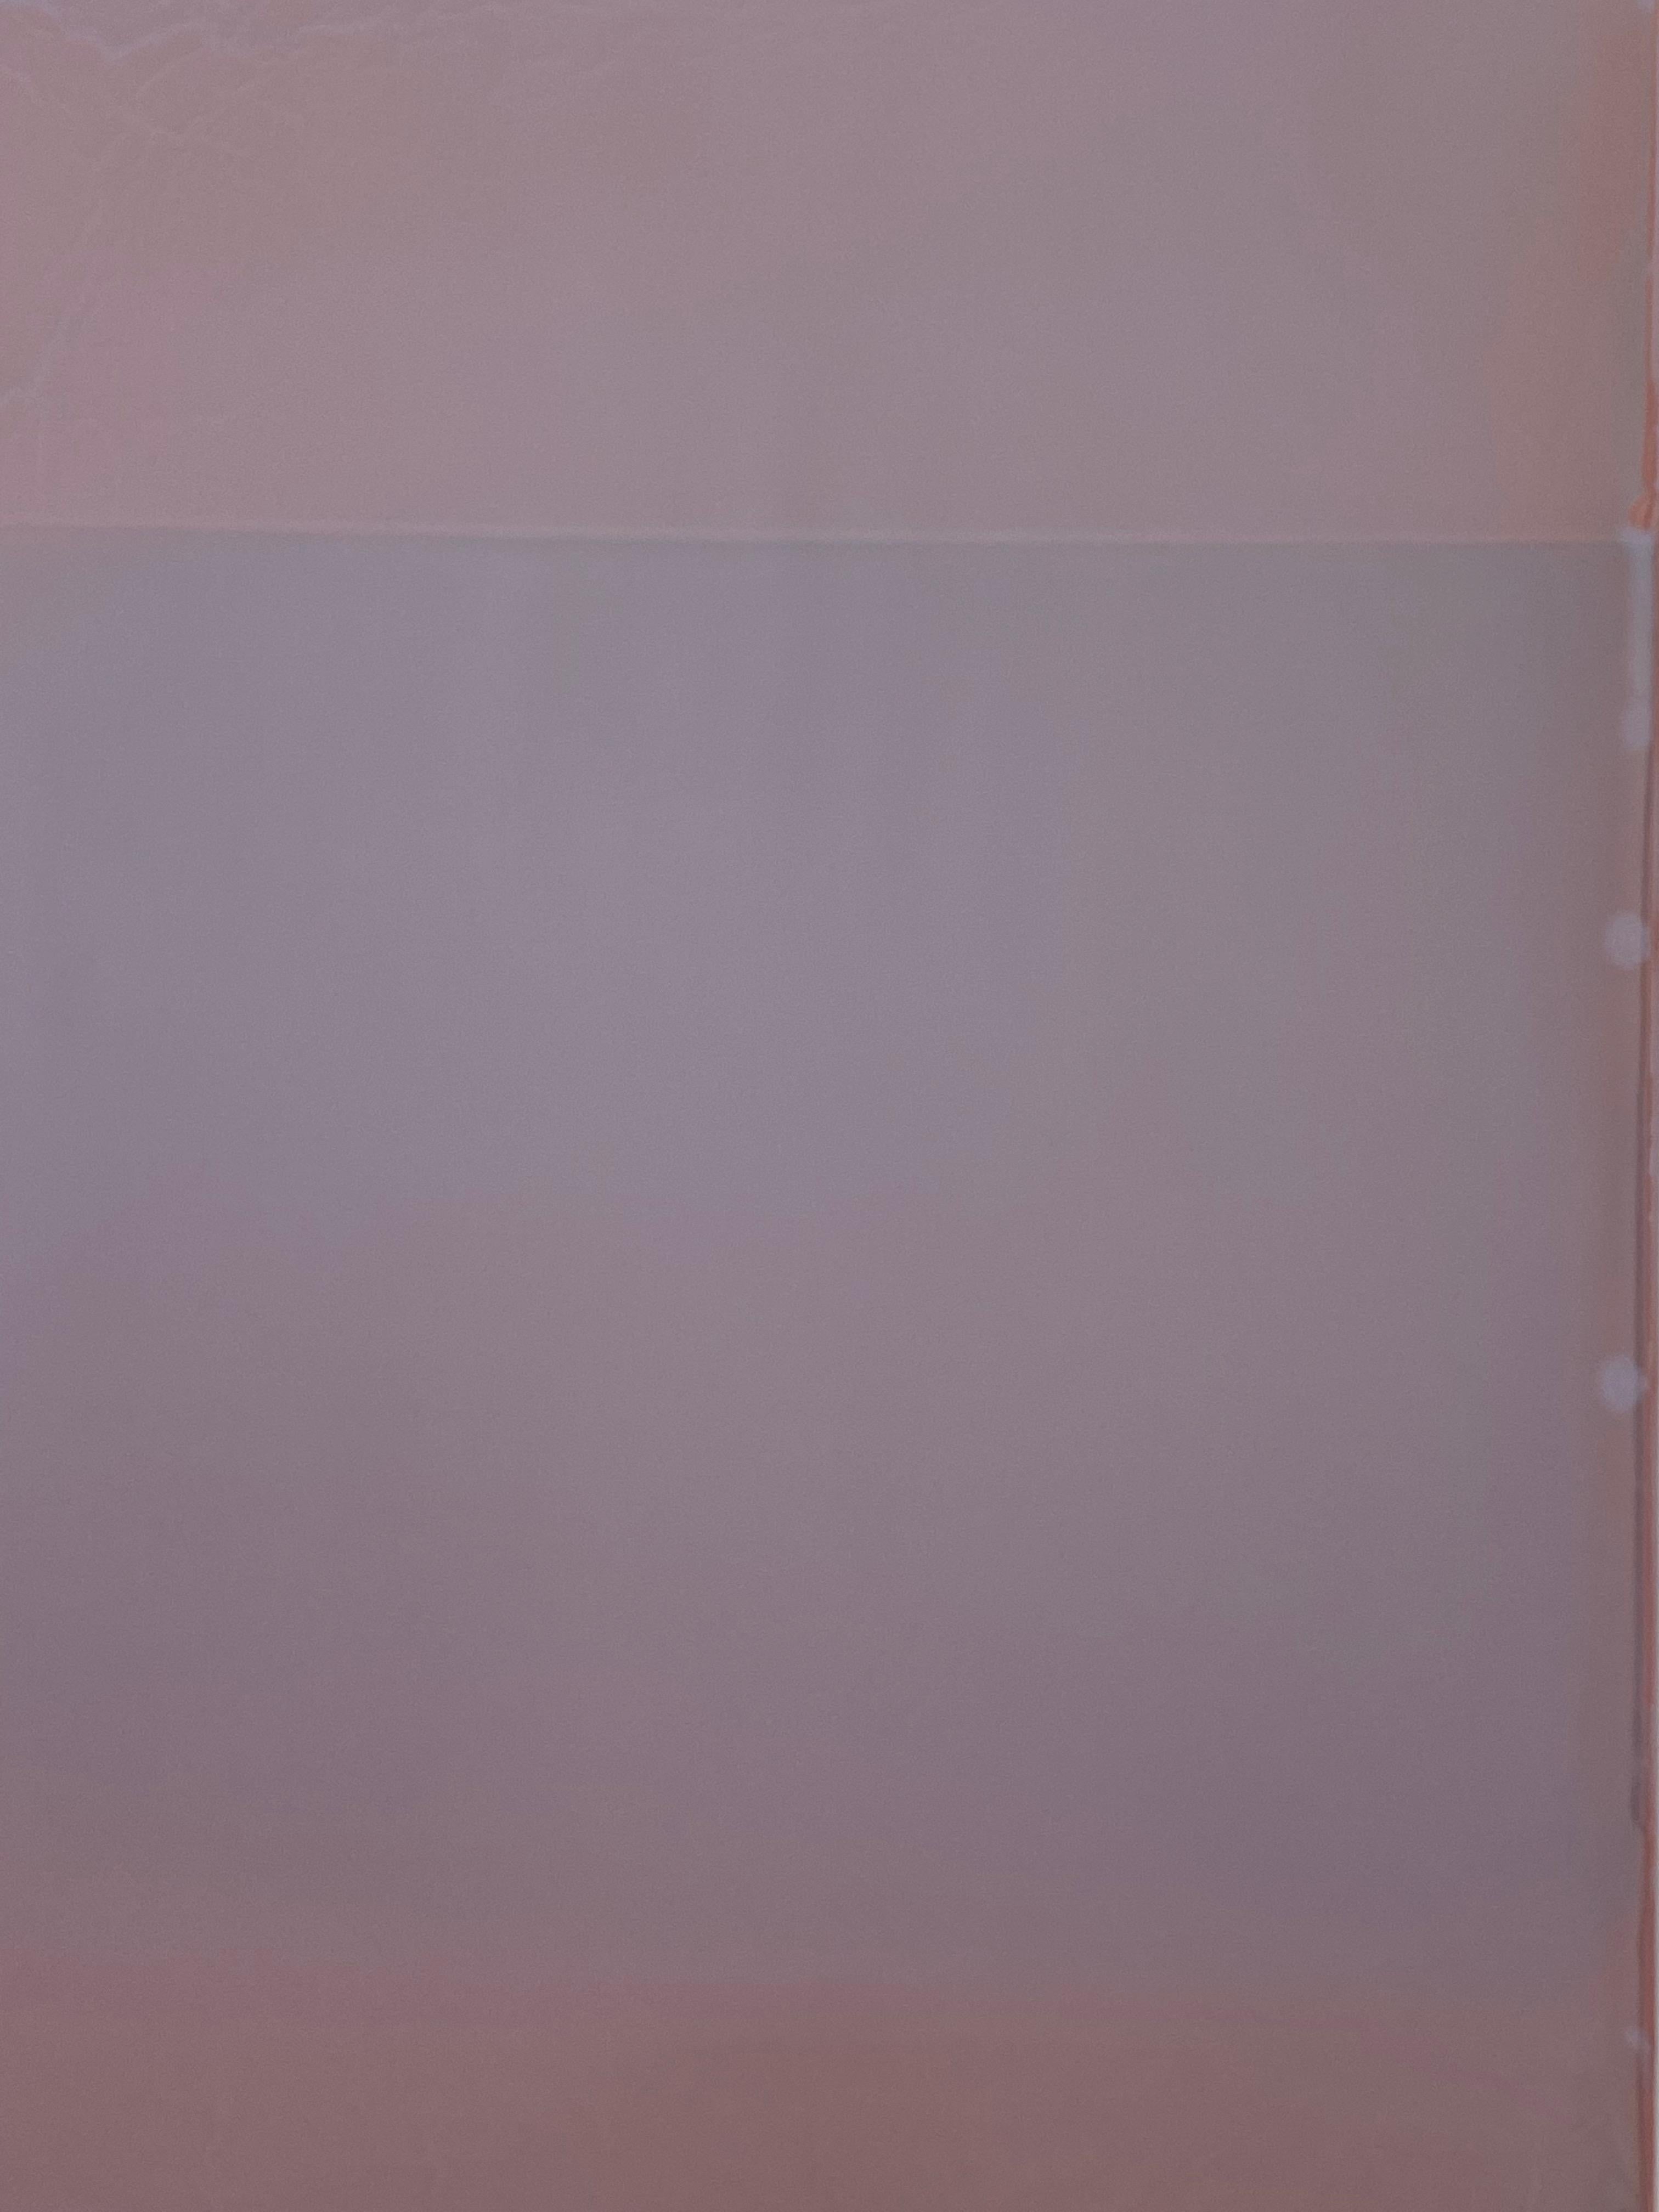 Weather Five, Light Peach Pink, Lilac Tinted Polymer Painting on Floating Panel For Sale 4